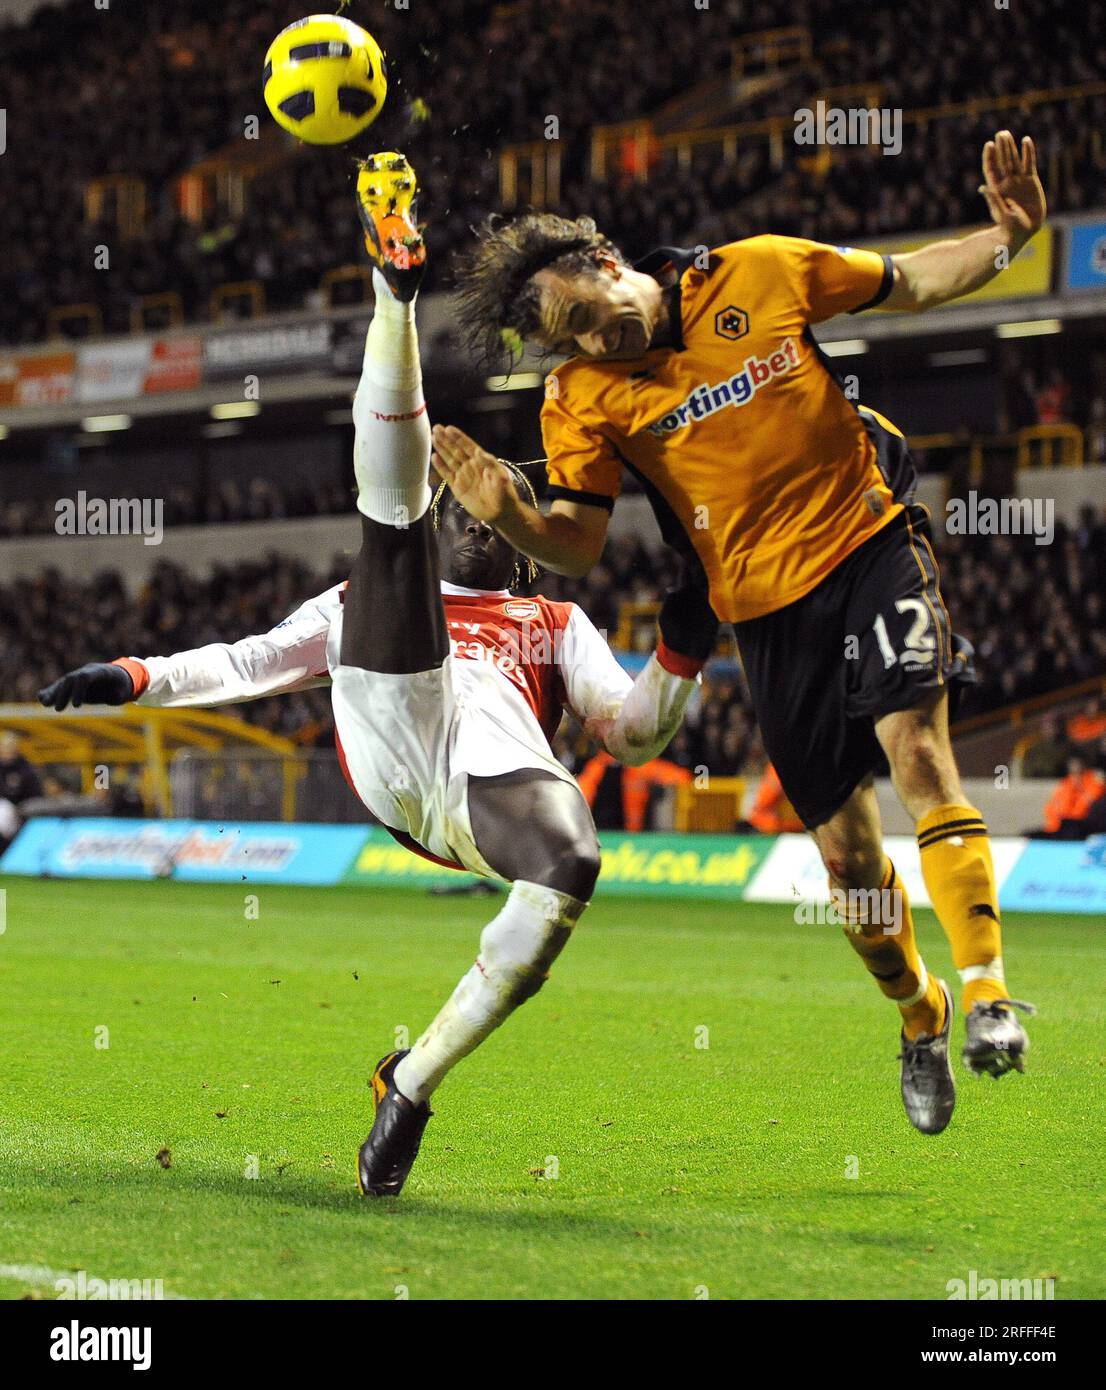 High kicking Bacary Sagna of Arsenal just misses the head of Stephen Hunt of Wolverhampton Wanderers  Barclays Premier League - Wolverhampton Wanderers v Arsenal 10/11/2010 Stock Photo